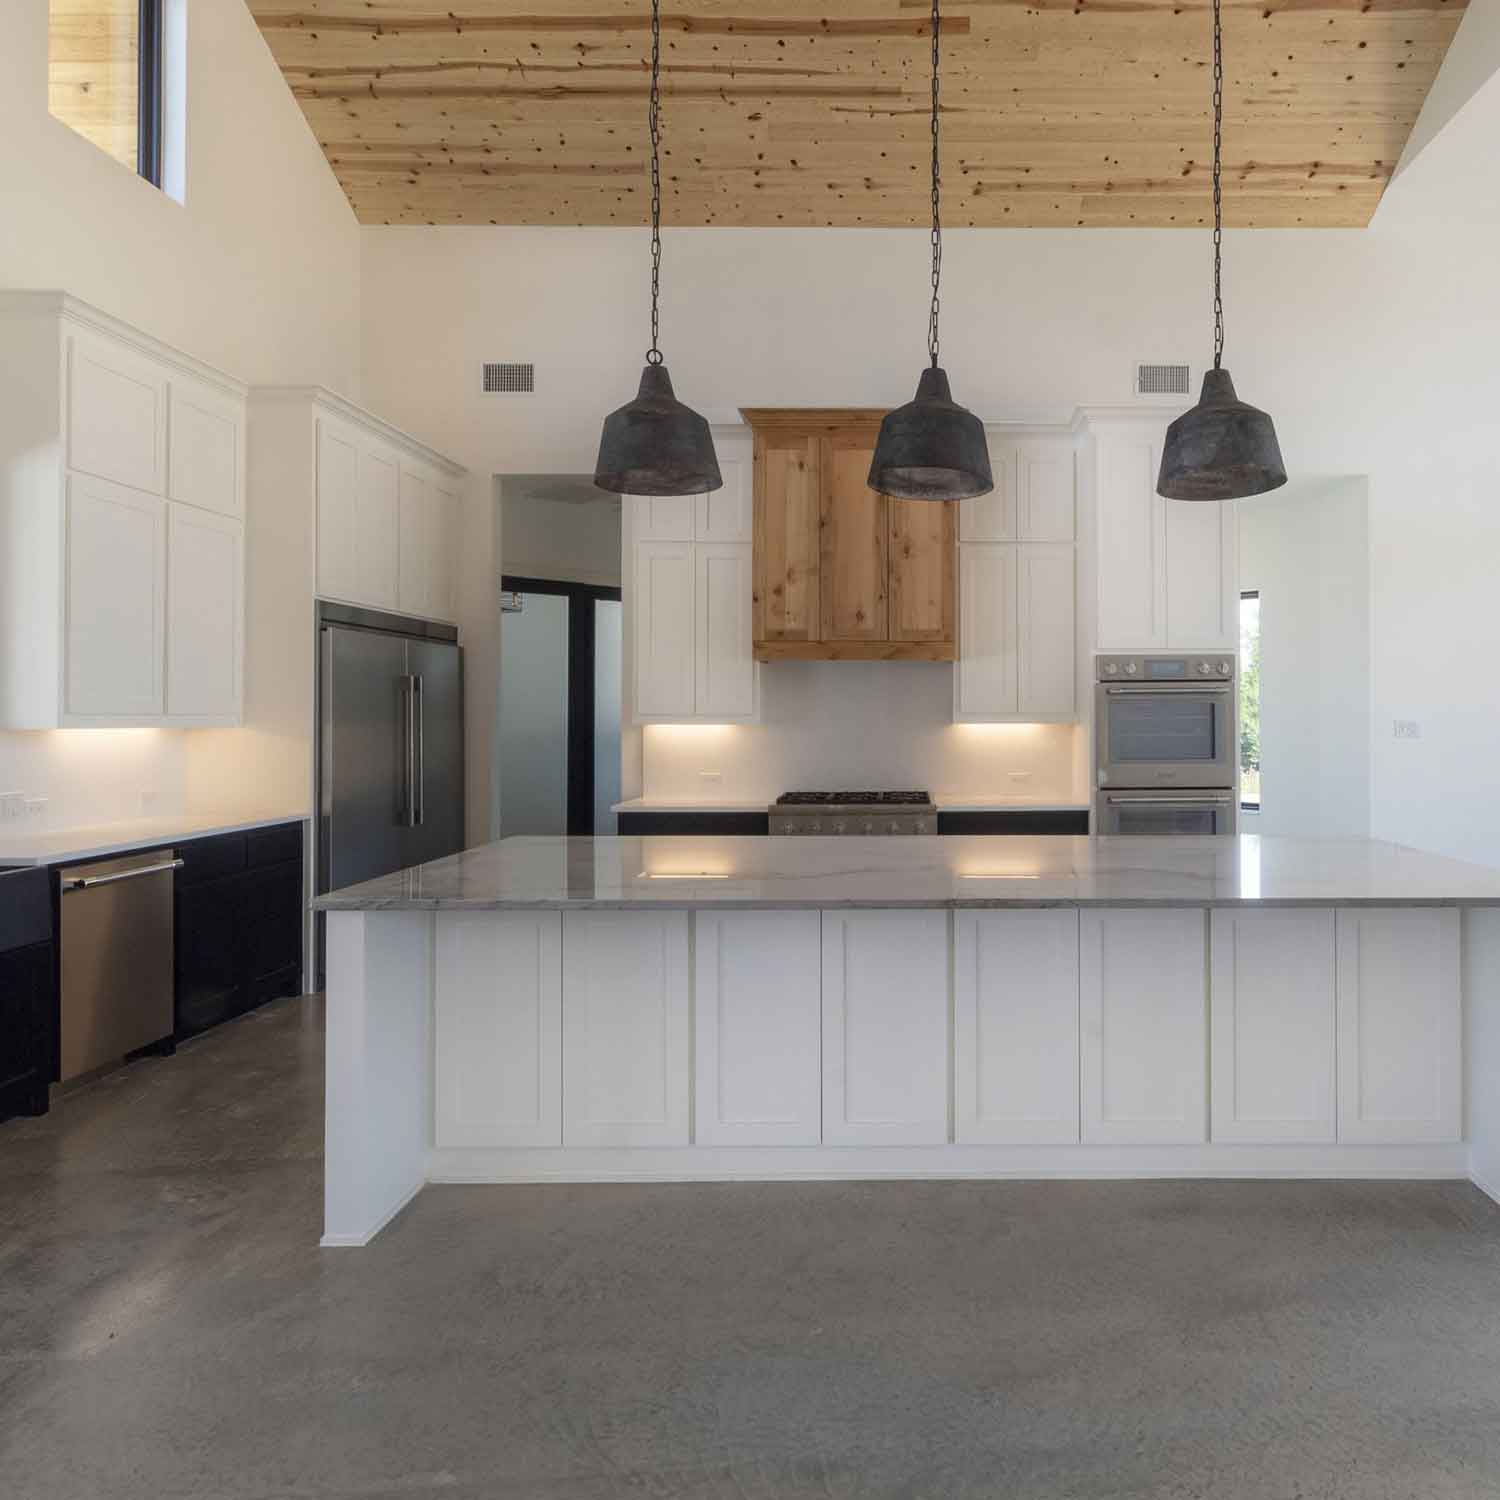 A Modern Kitchen With Polished Concrete Floors in Fort Worth, Texas.